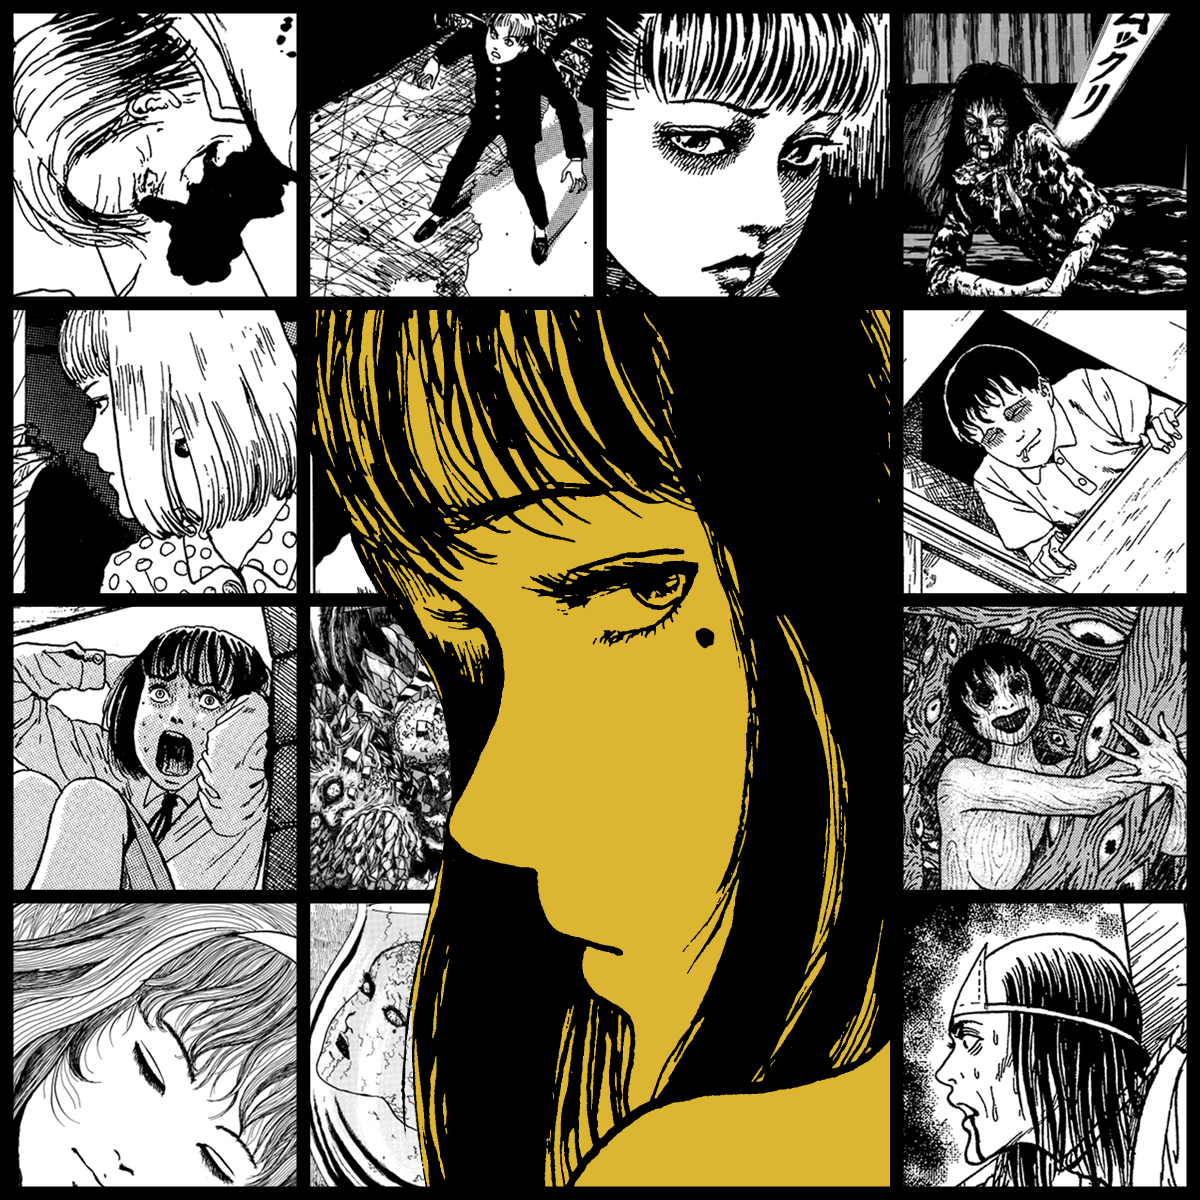 TOMIE by Junji Ito #618